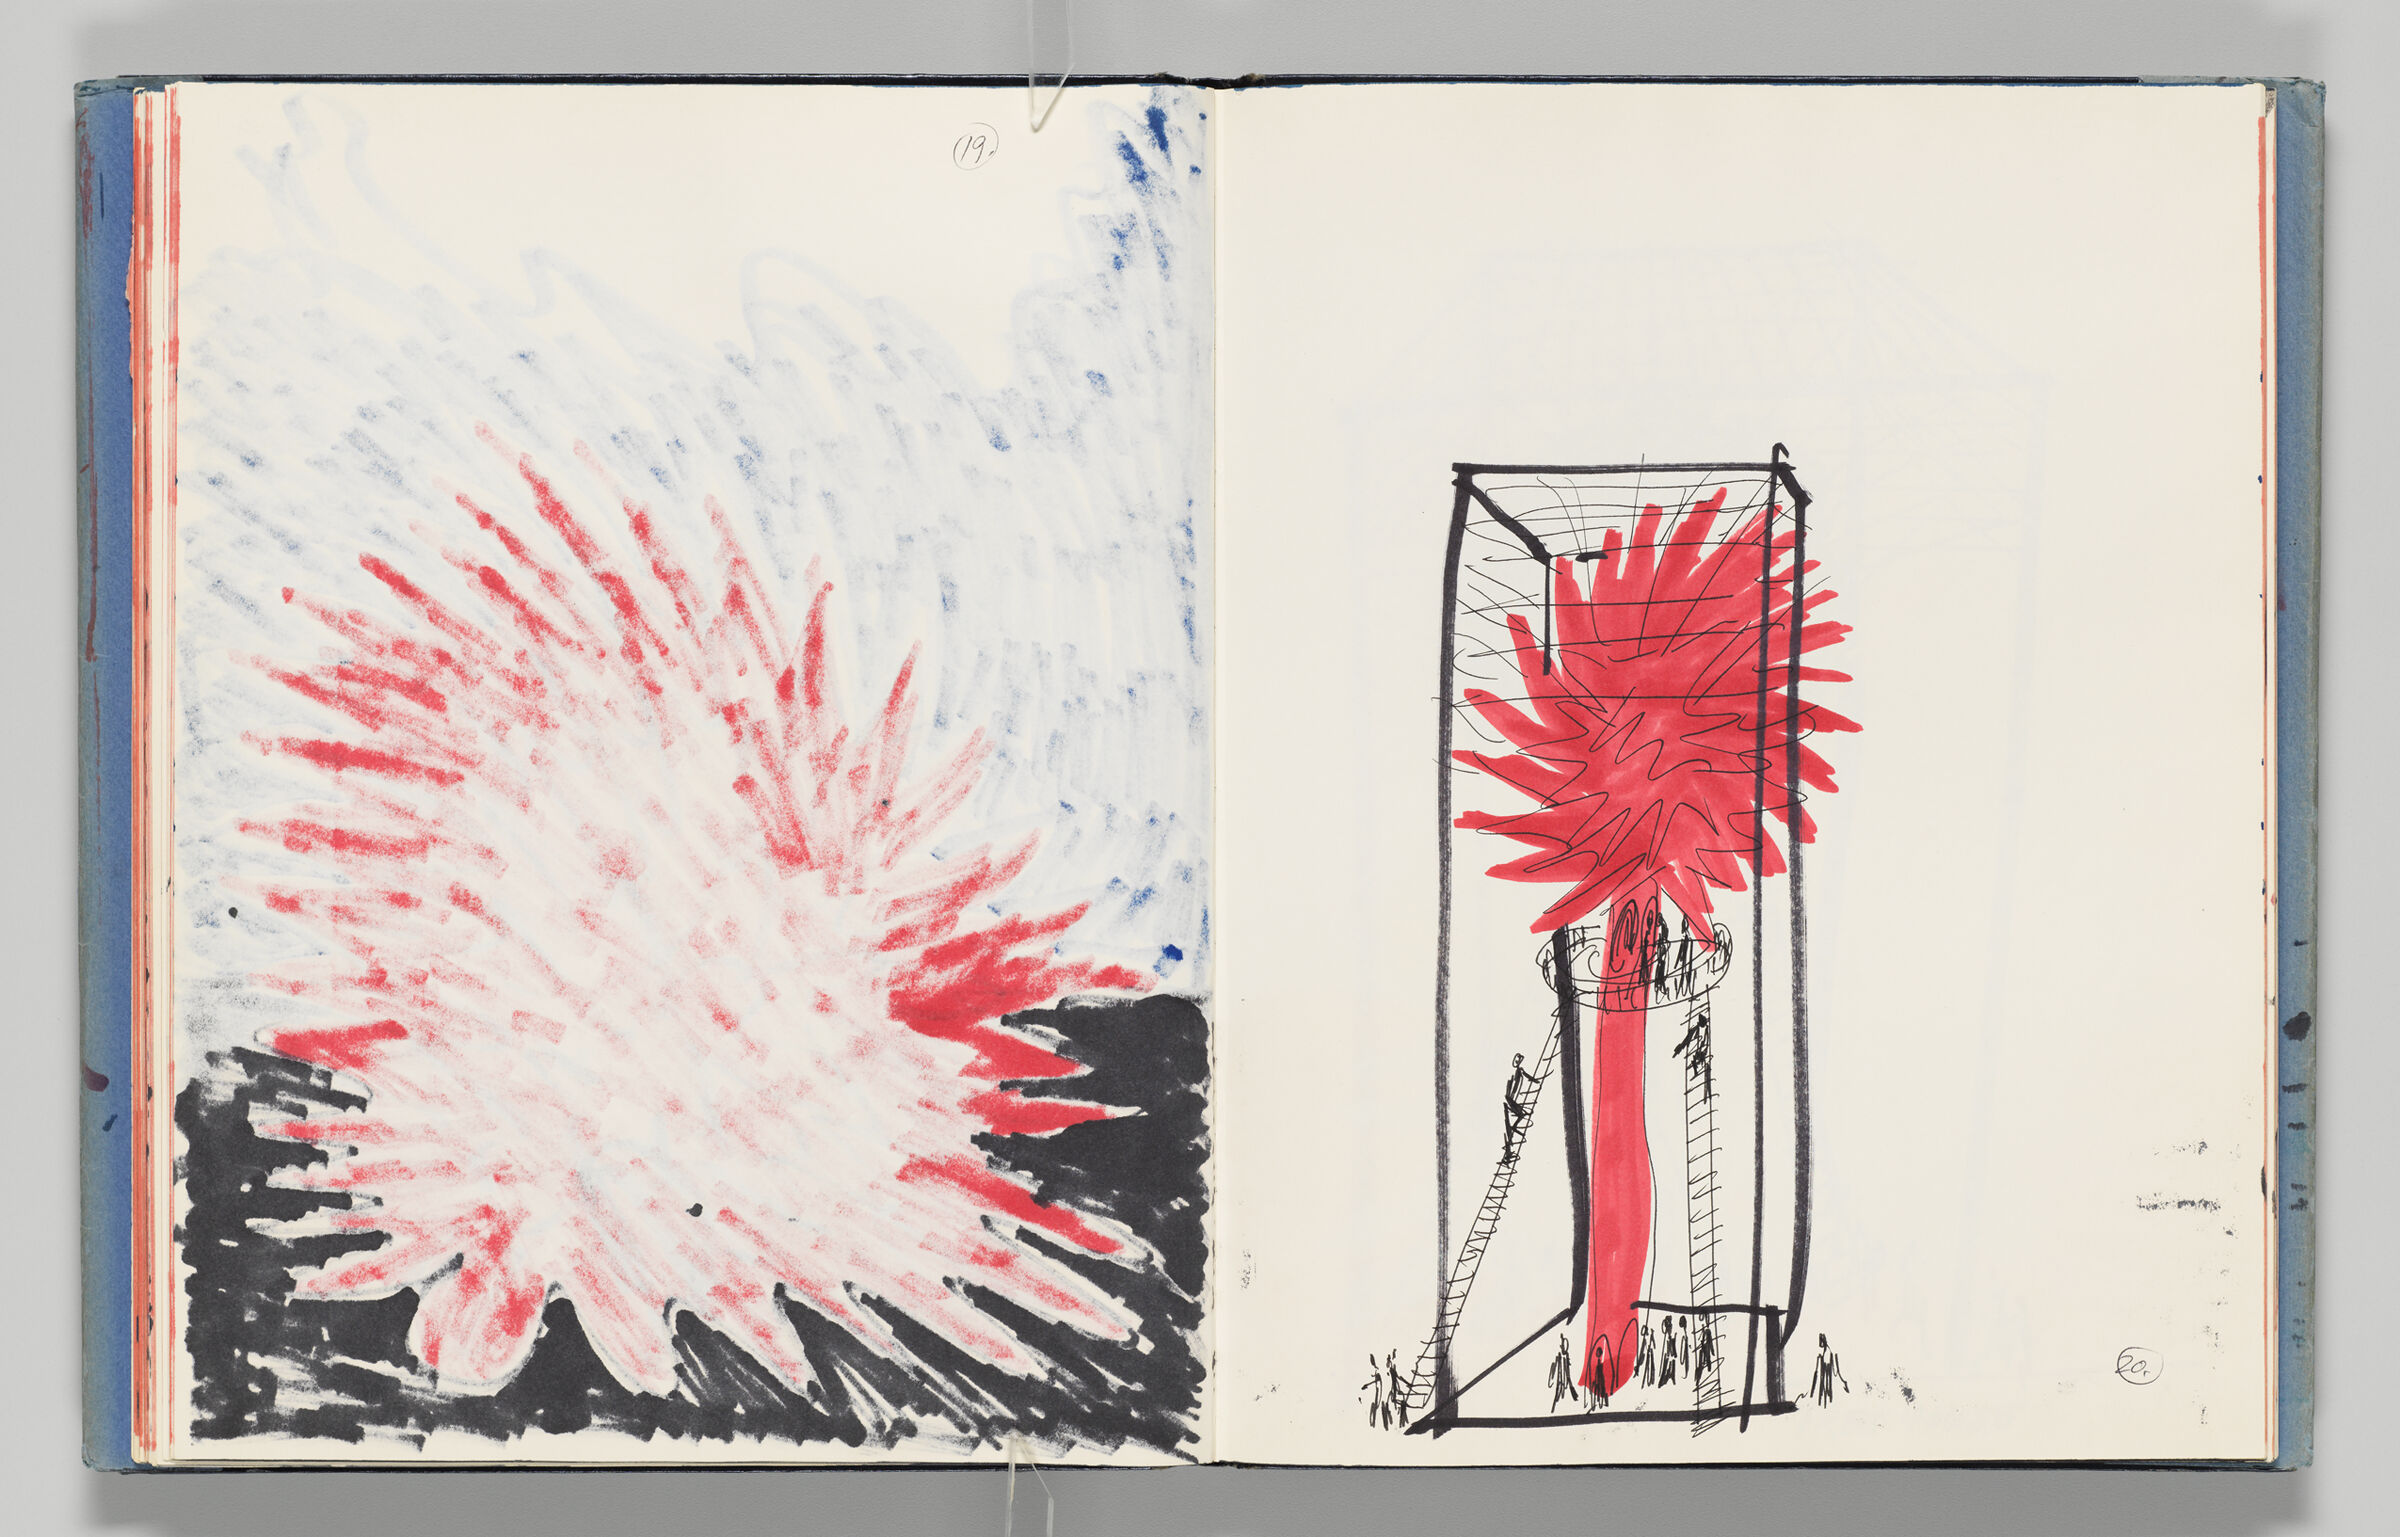 Untitled (Bleed-Through Of Previous Page With Page Number, Left Page); Untitled (Design For Flower House With Ladders, Right Page)